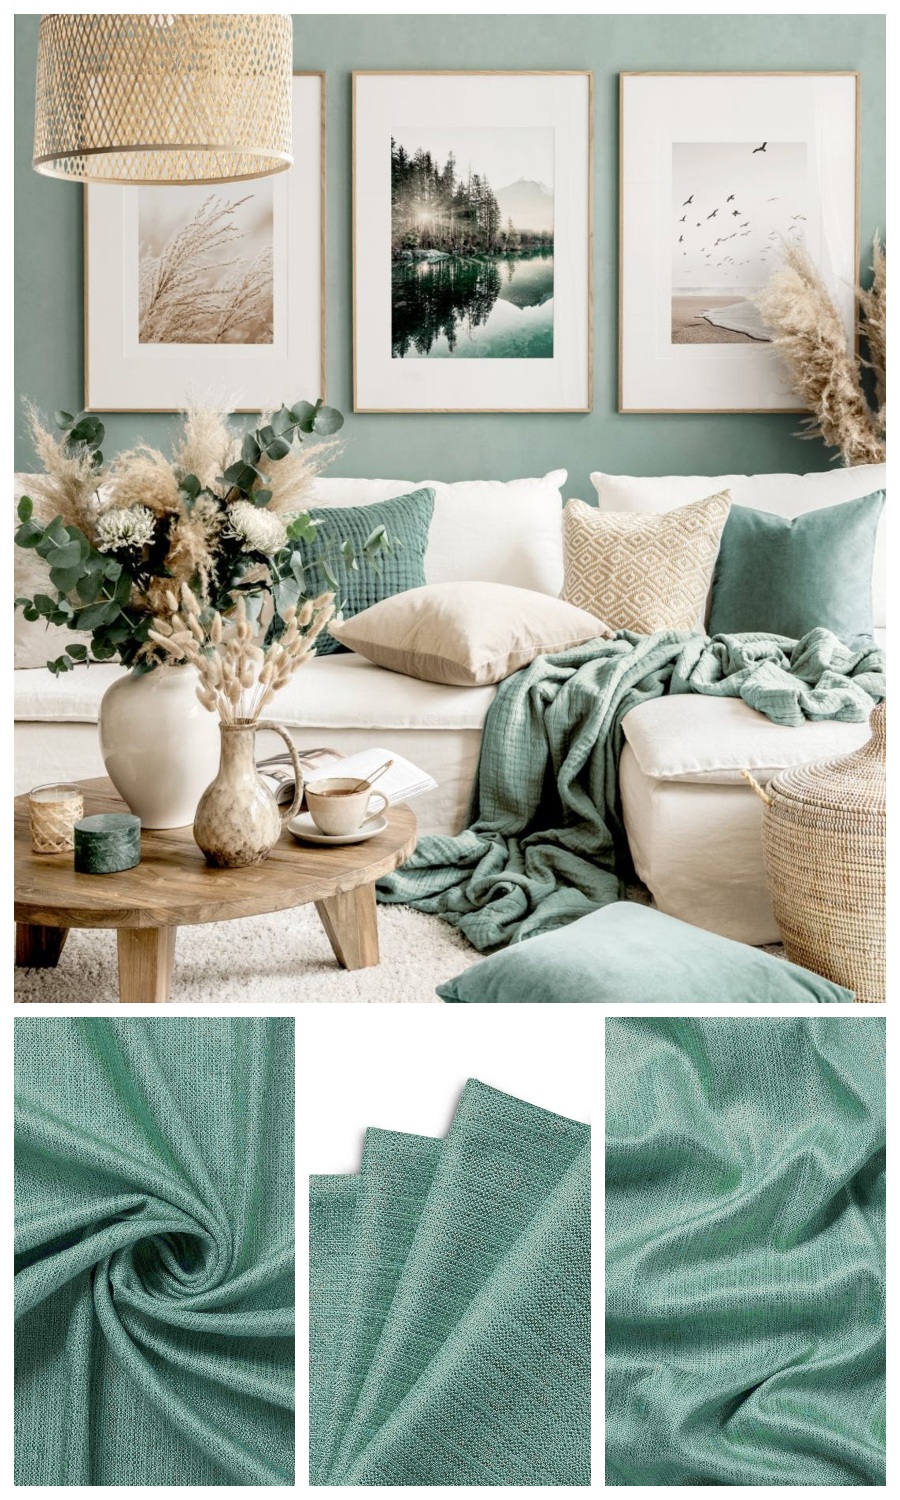 MONDAY MOOD: INSPIRED BY &#8216;SIMPLY SEAFOAM&#8217;